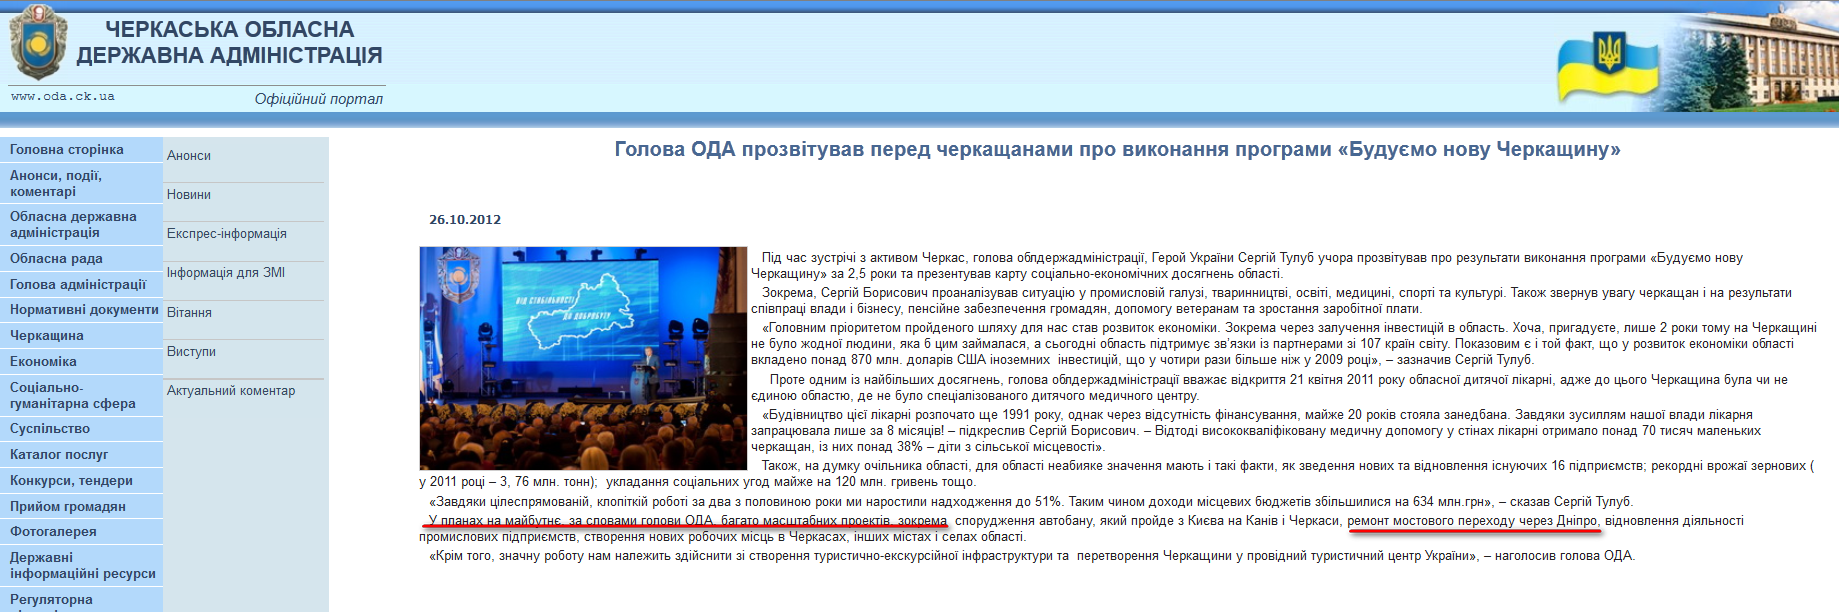 http://www.oda.ck.ua/?lng=ukr&section=2&page=2&id=7554